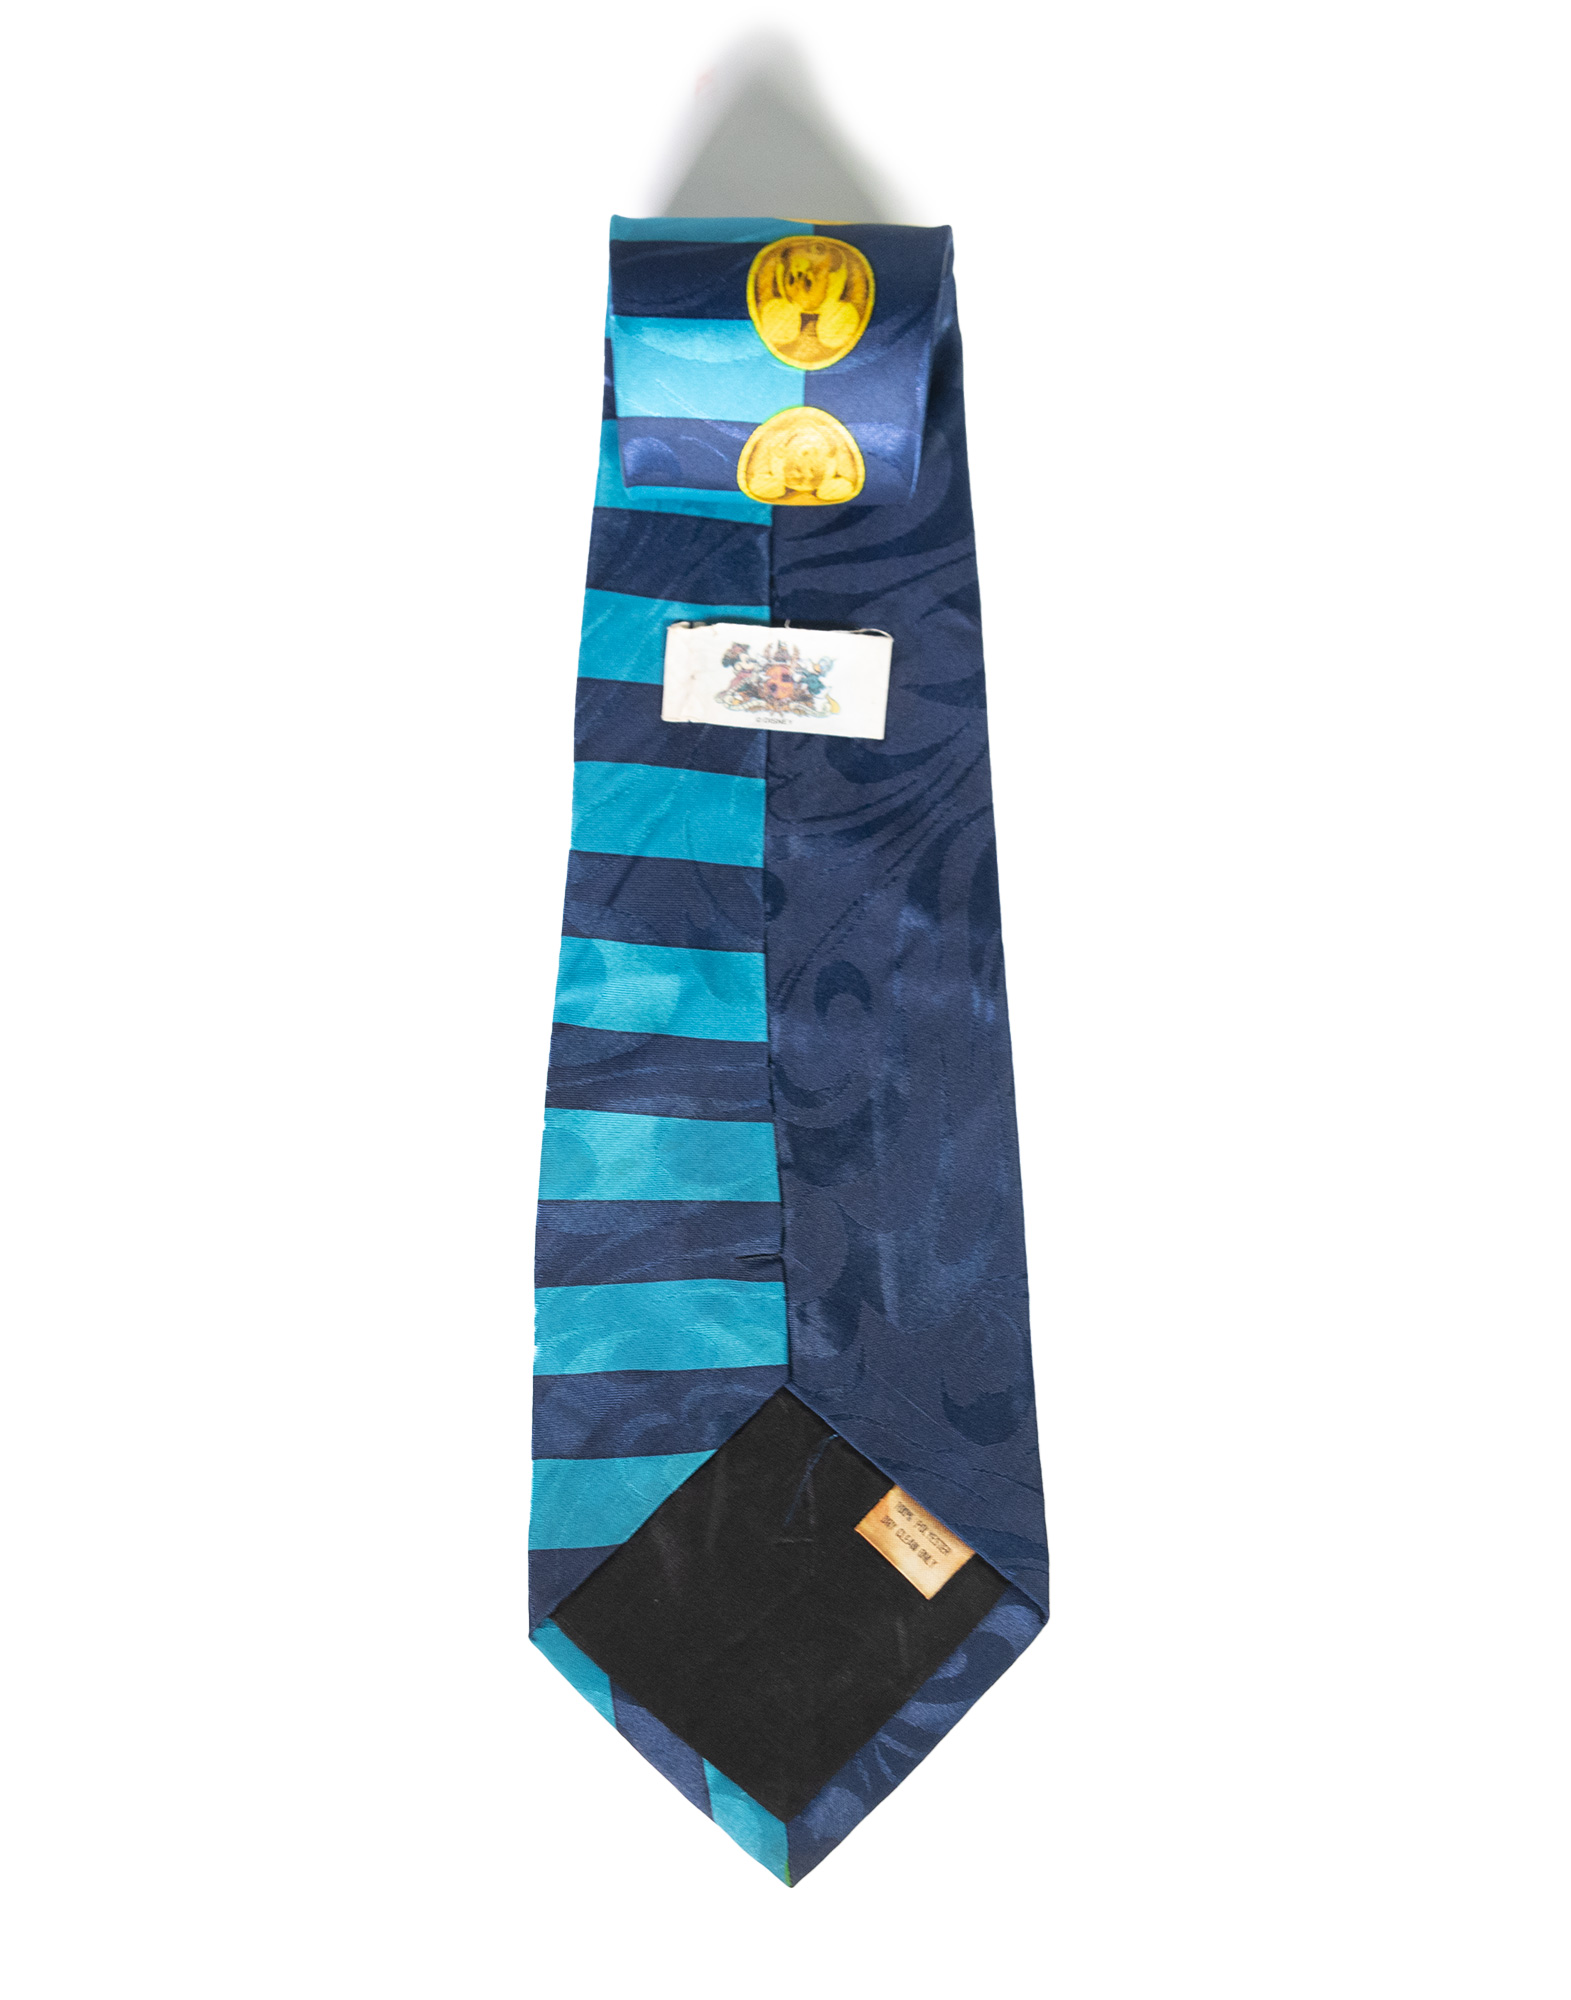 Disney - Blue tie with gold coins